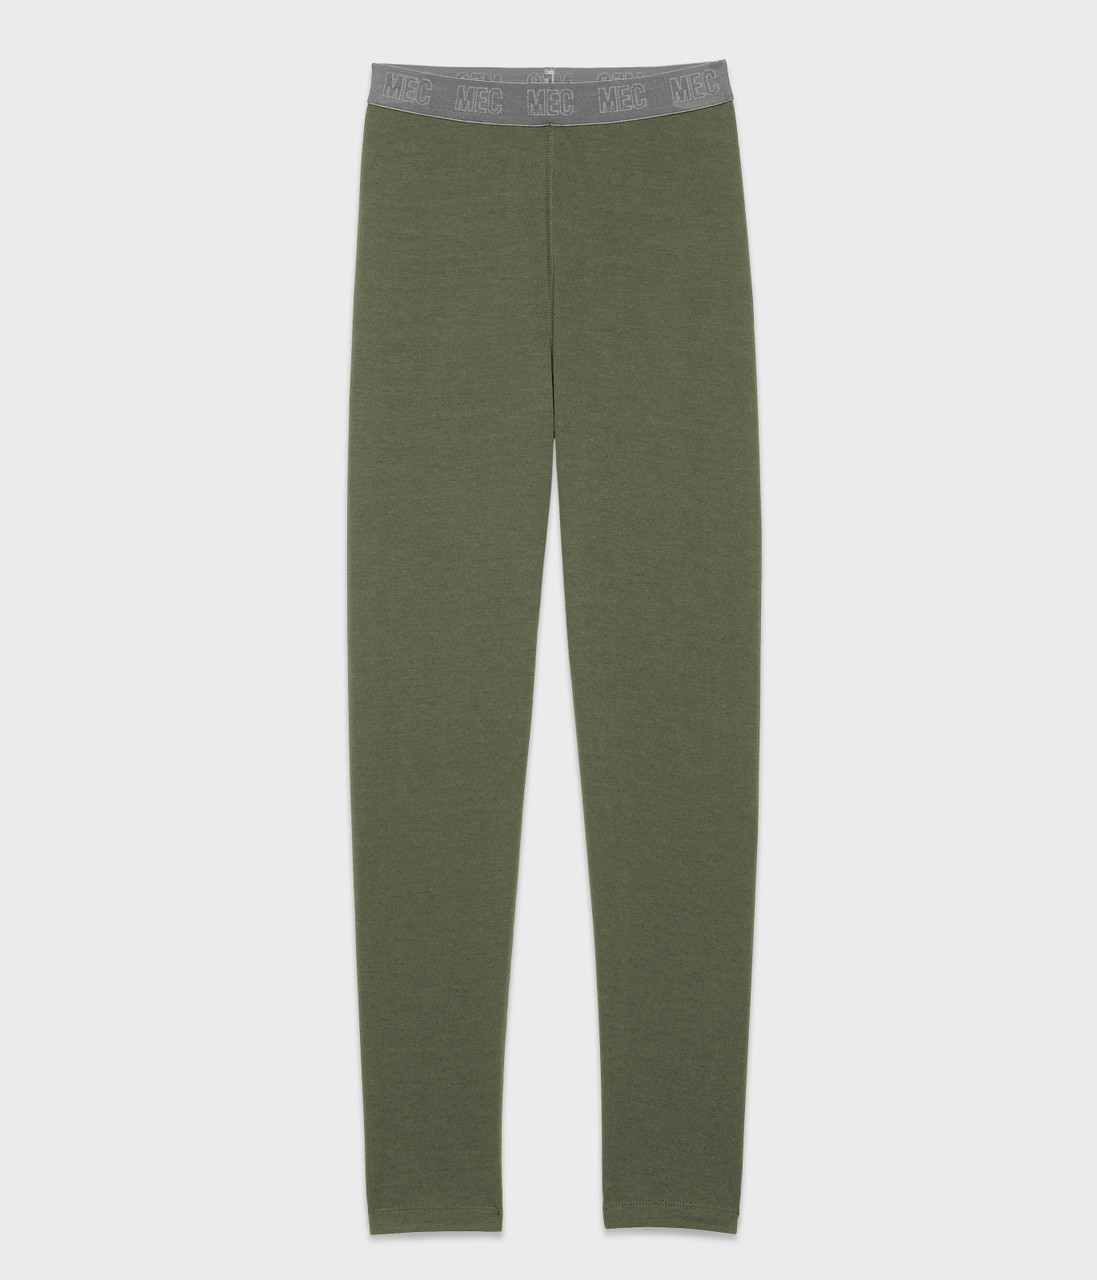 Midweight Underwear Long Johns Green Olive